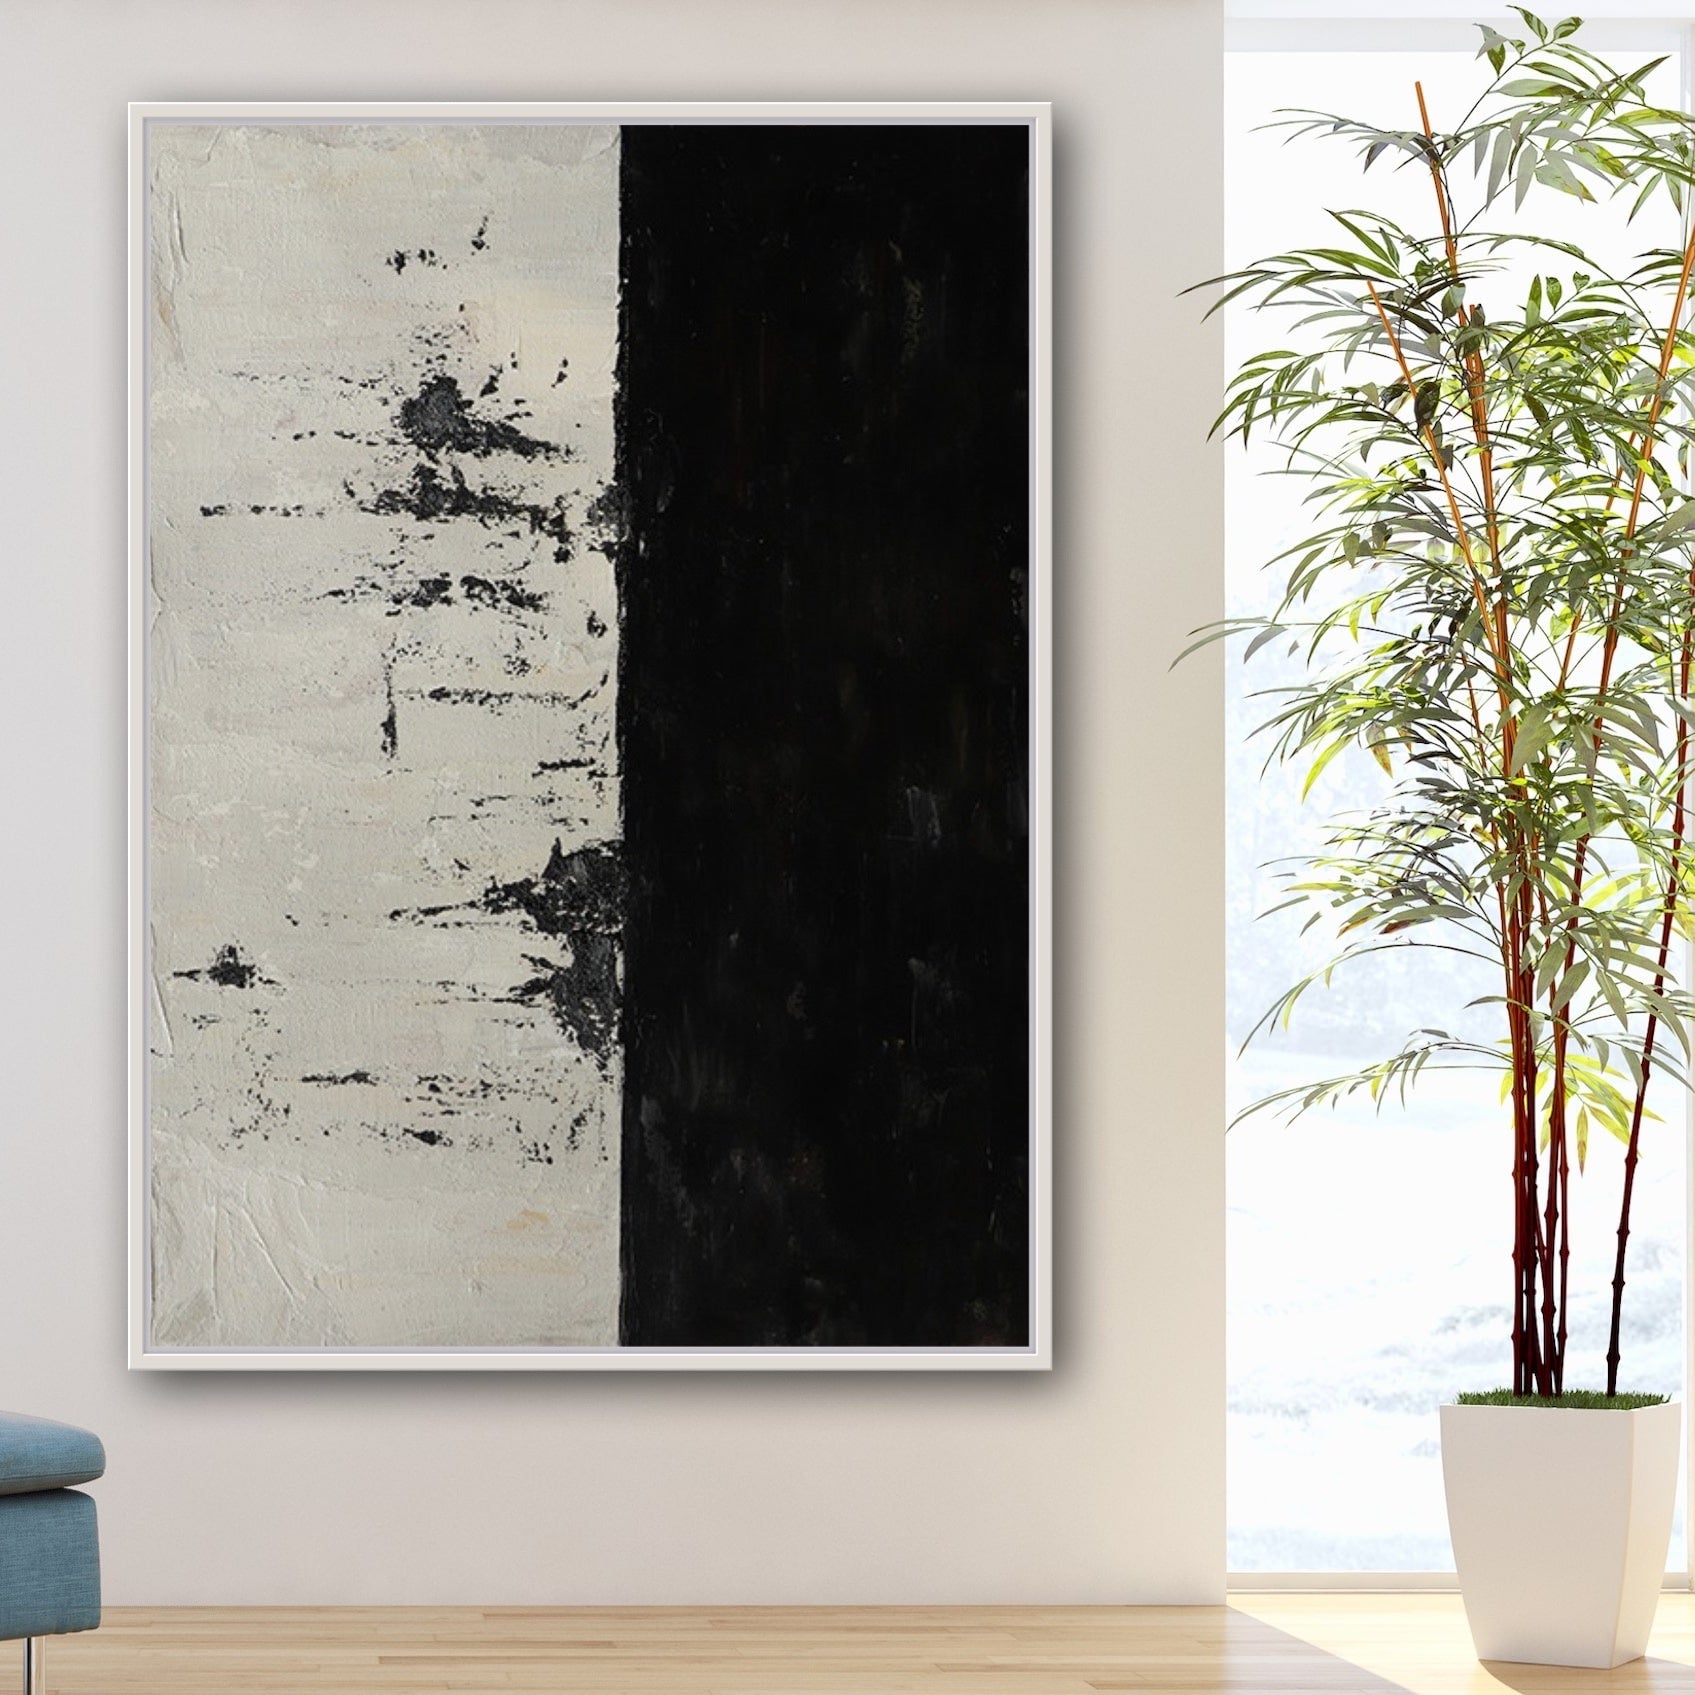 Ovedue, Black And Silver / 90x120cm